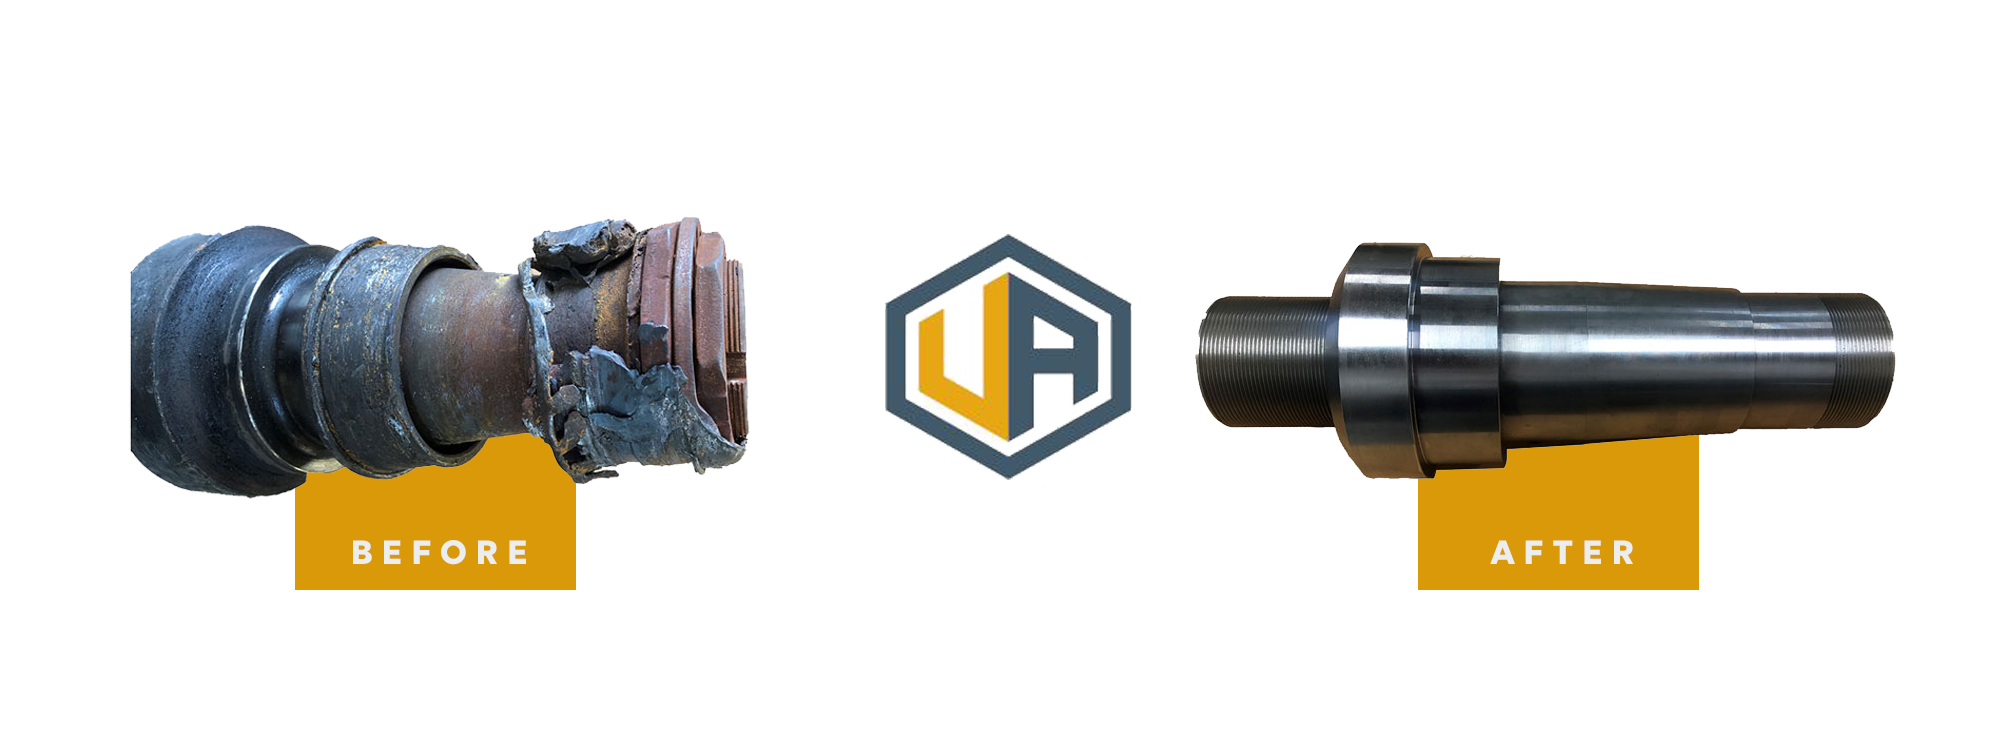 united Axle before after